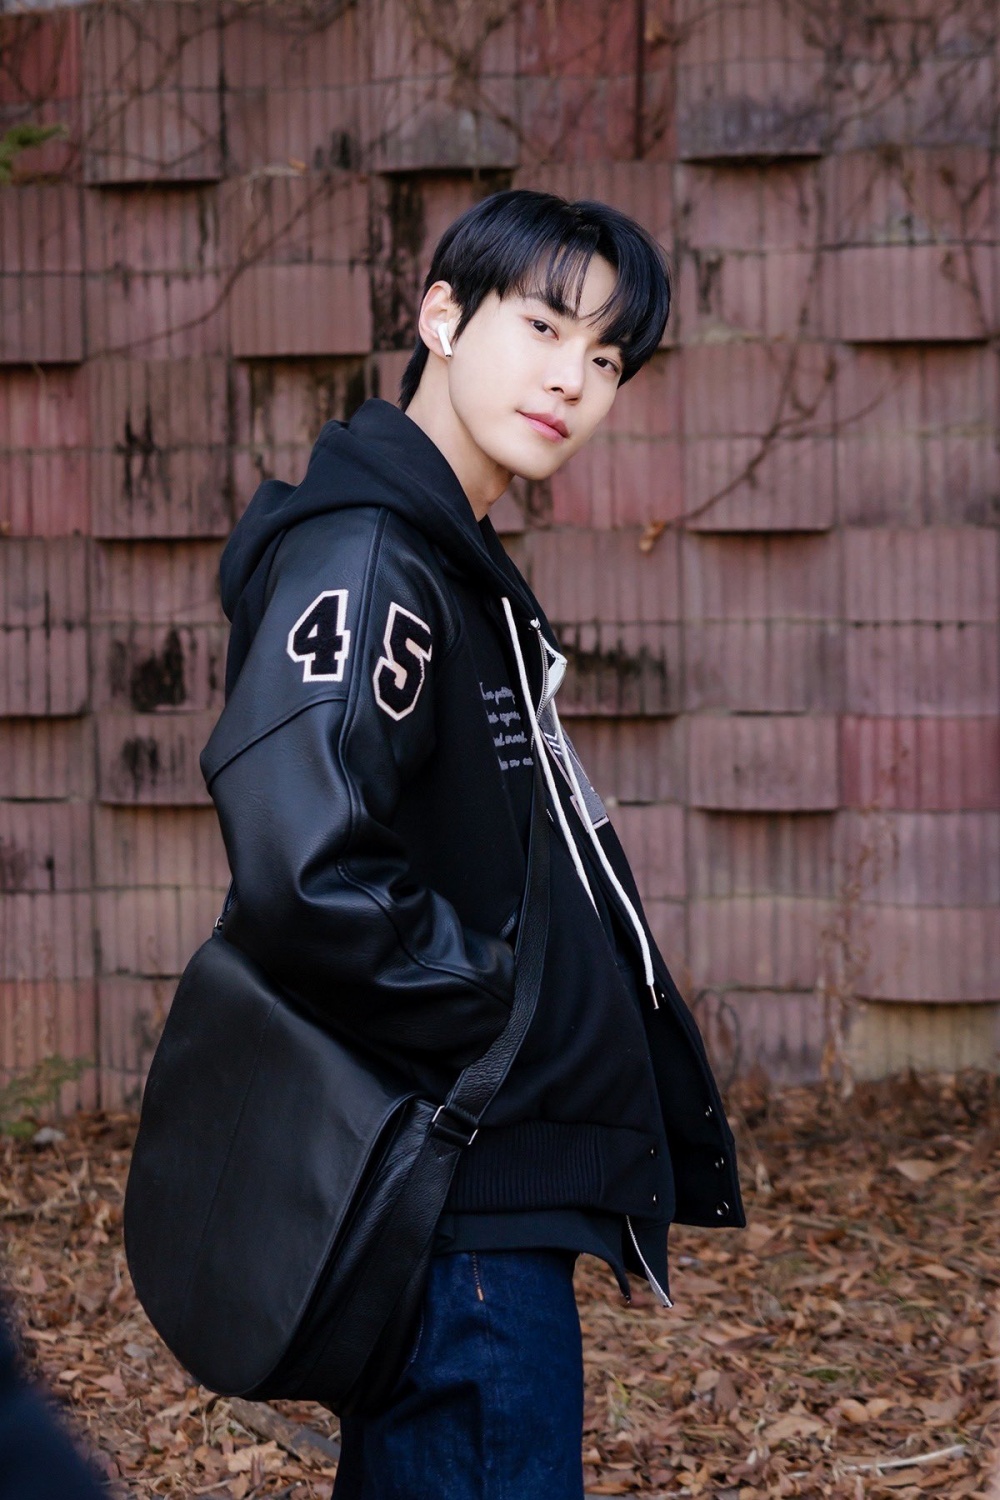 NCT Doyoung, 'Dear X' OST released on the 22nd